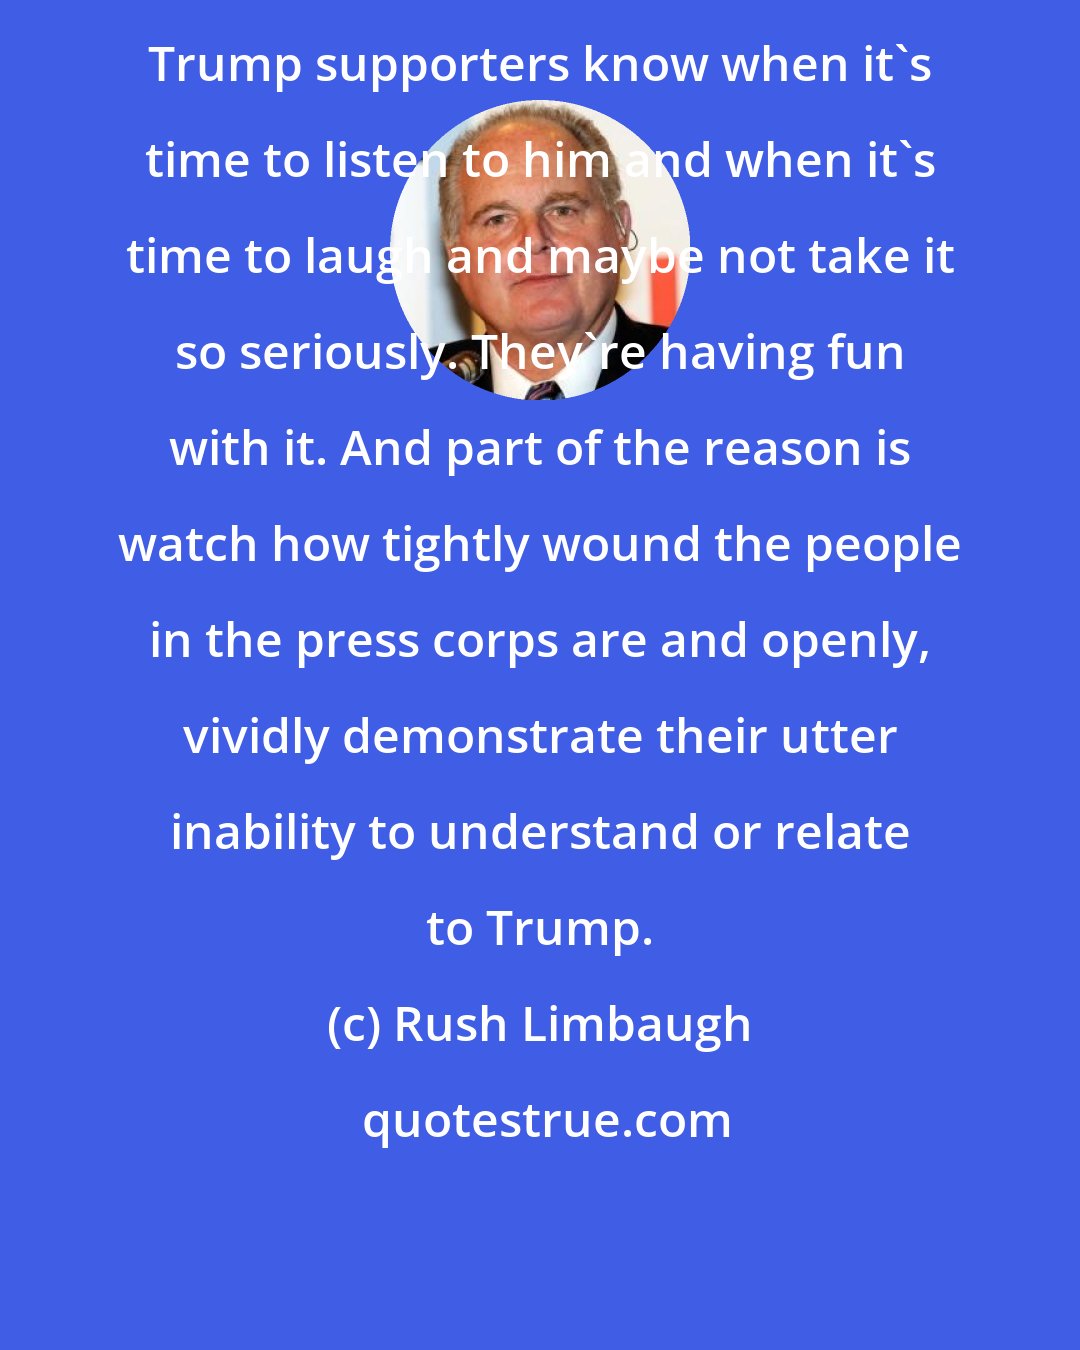 Rush Limbaugh: Trump supporters know when it's time to listen to him and when it's time to laugh and maybe not take it so seriously. They're having fun with it. And part of the reason is watch how tightly wound the people in the press corps are and openly, vividly demonstrate their utter inability to understand or relate to Trump.